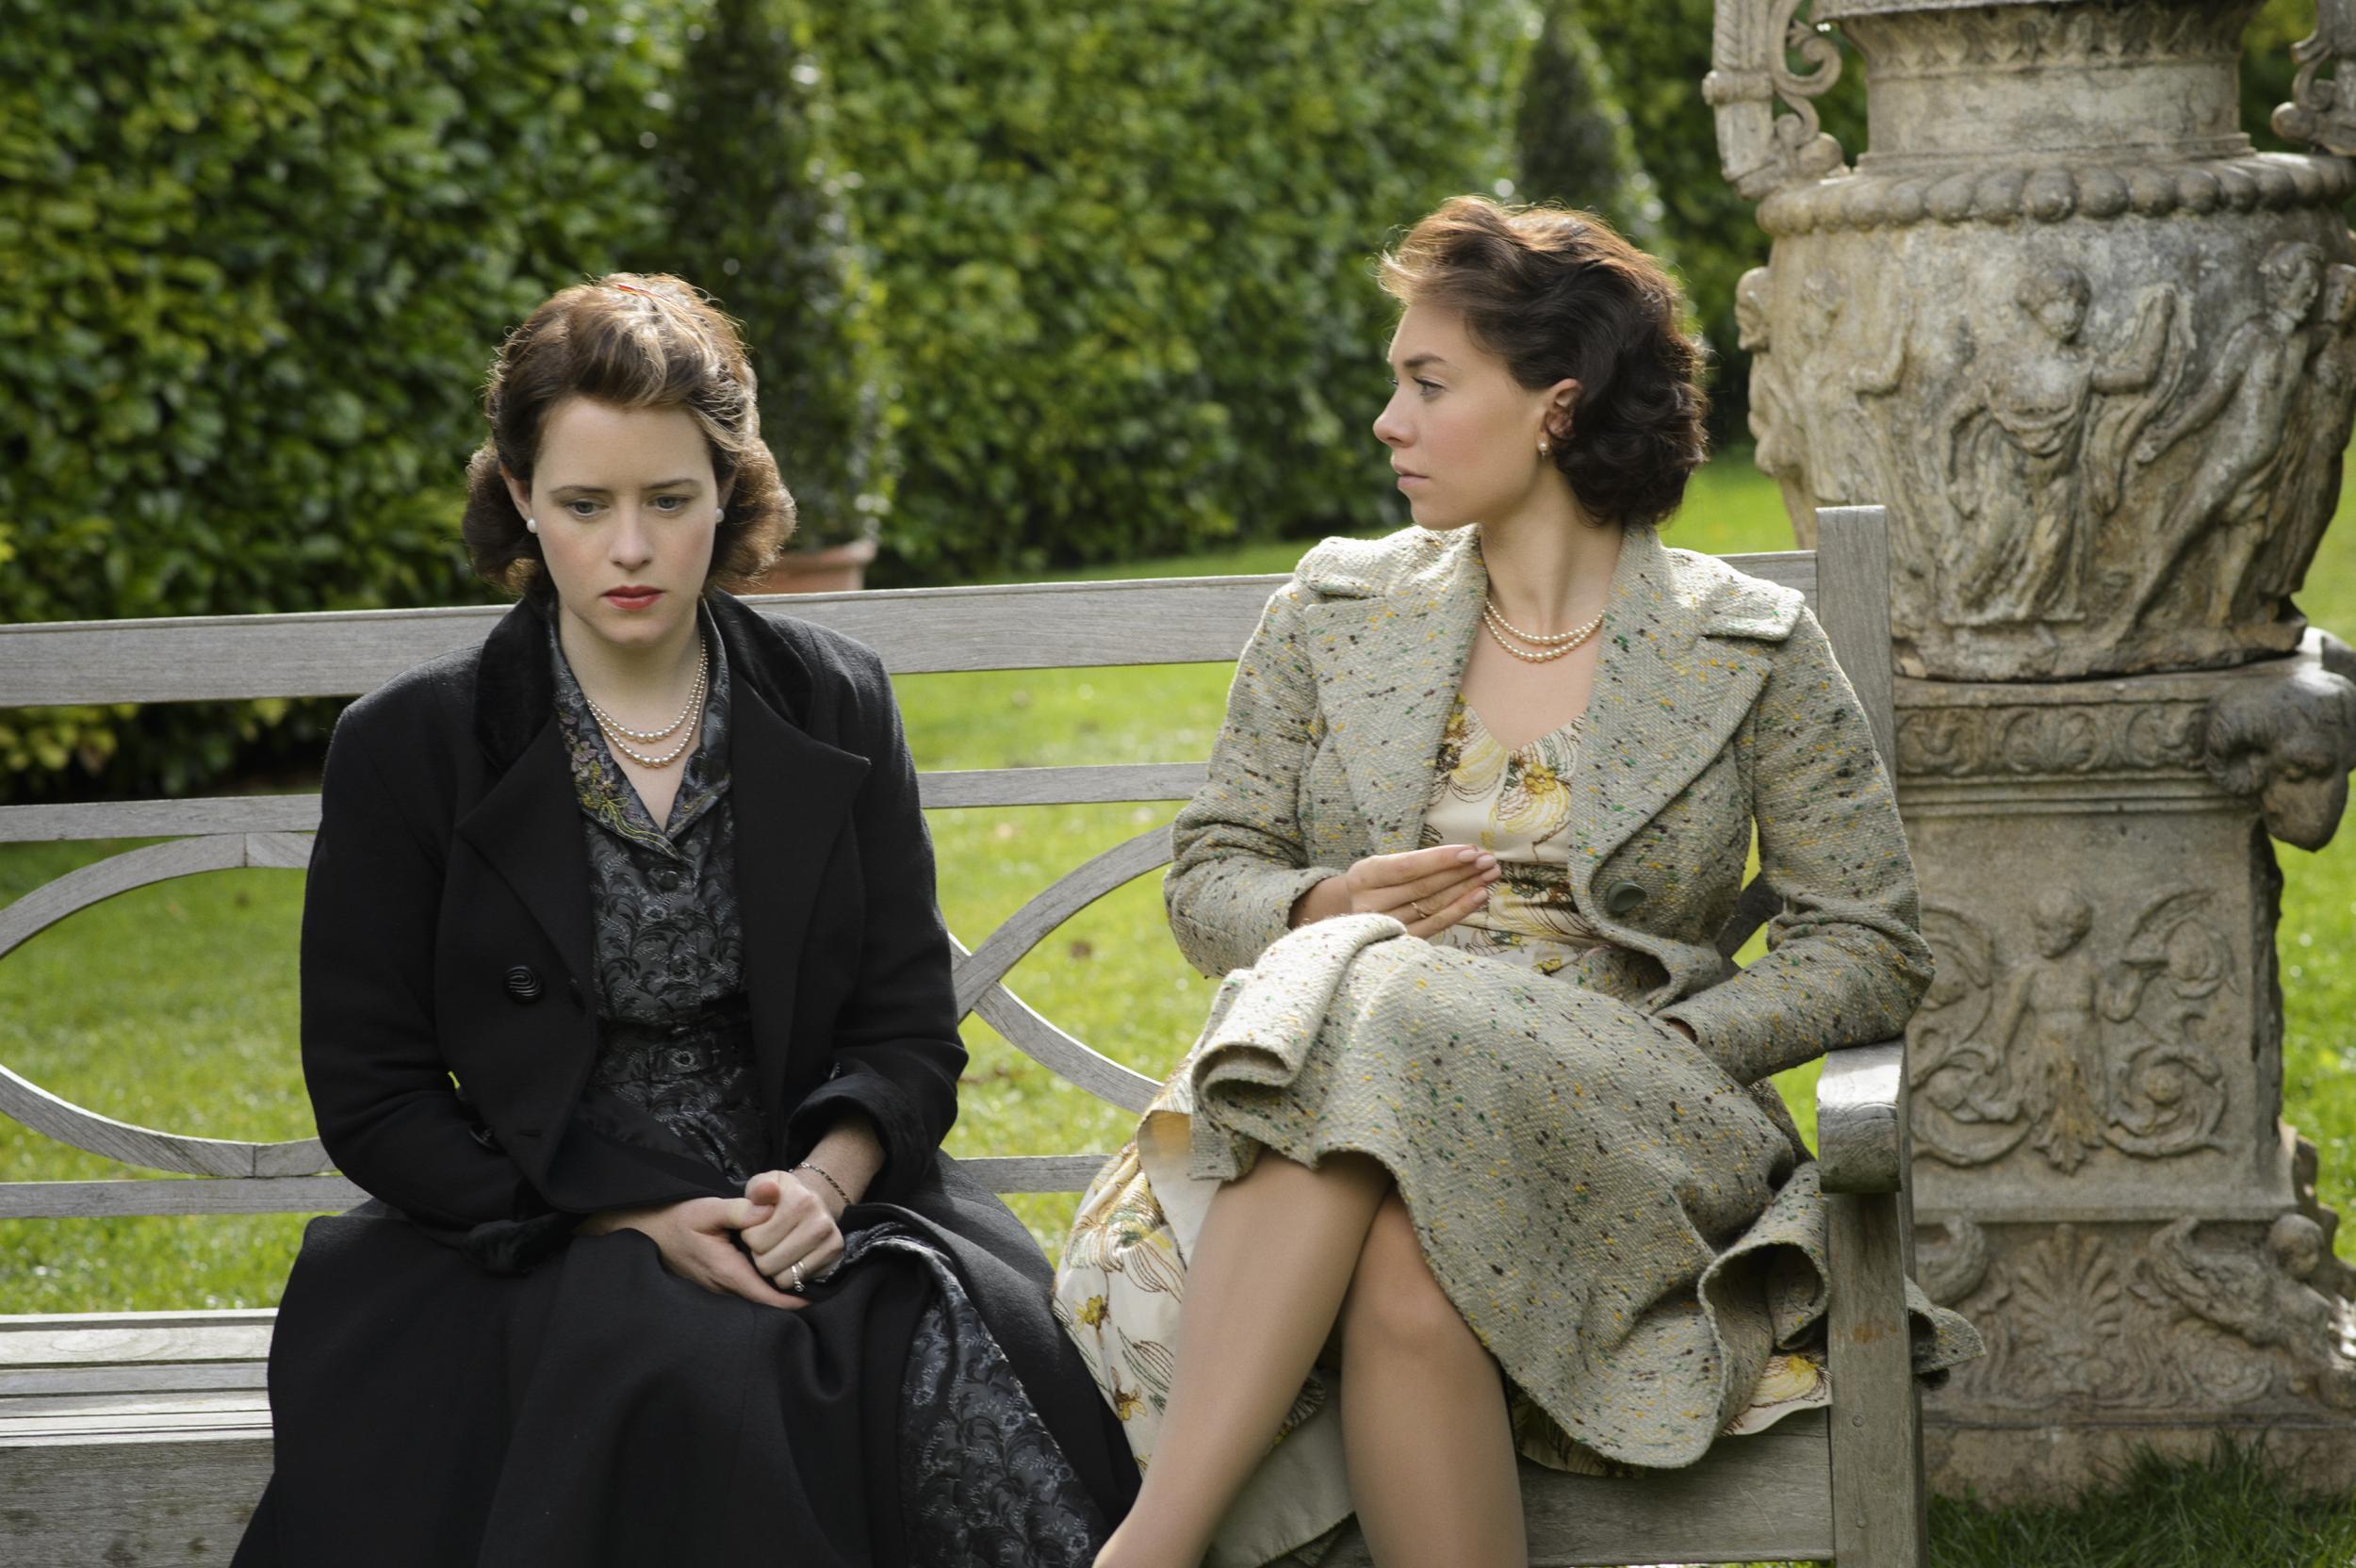 Two sisters: Claire Foy (left) as the young Queen and Vanessa Kirby (right) as Princess Margaret in Netflix's ‘The Crown’